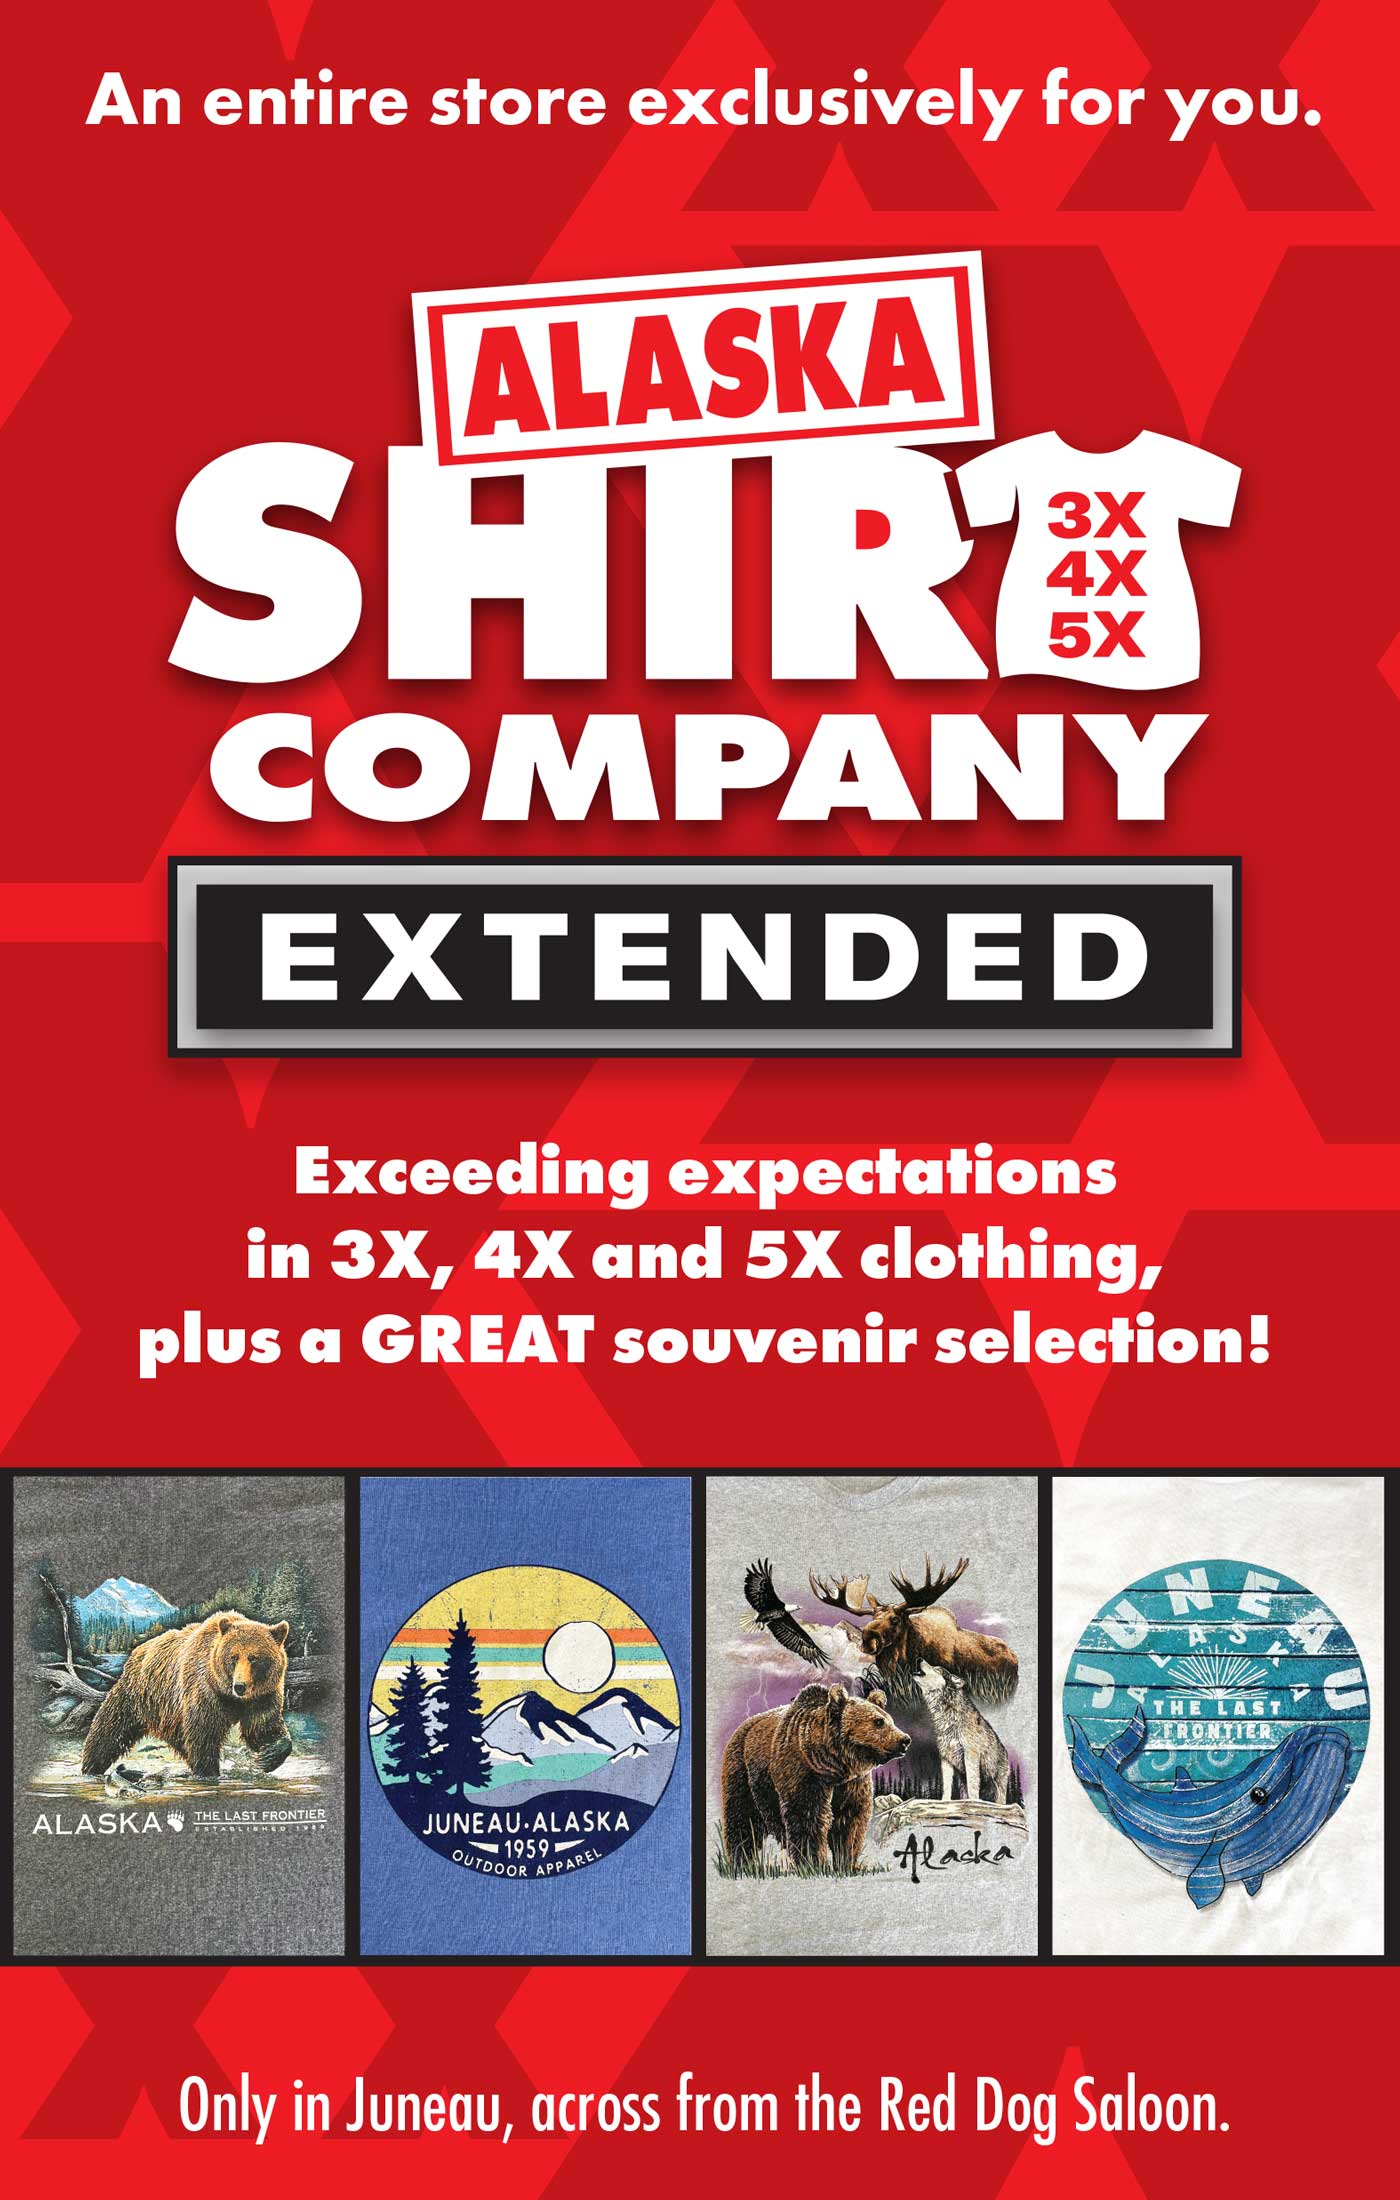 image of Alaska Shirt Company's new store, Alaska Shirt Co - Extended. Dedicated to 3X, 4X, and 5X clothing. Plus great souvenirs to take back home!